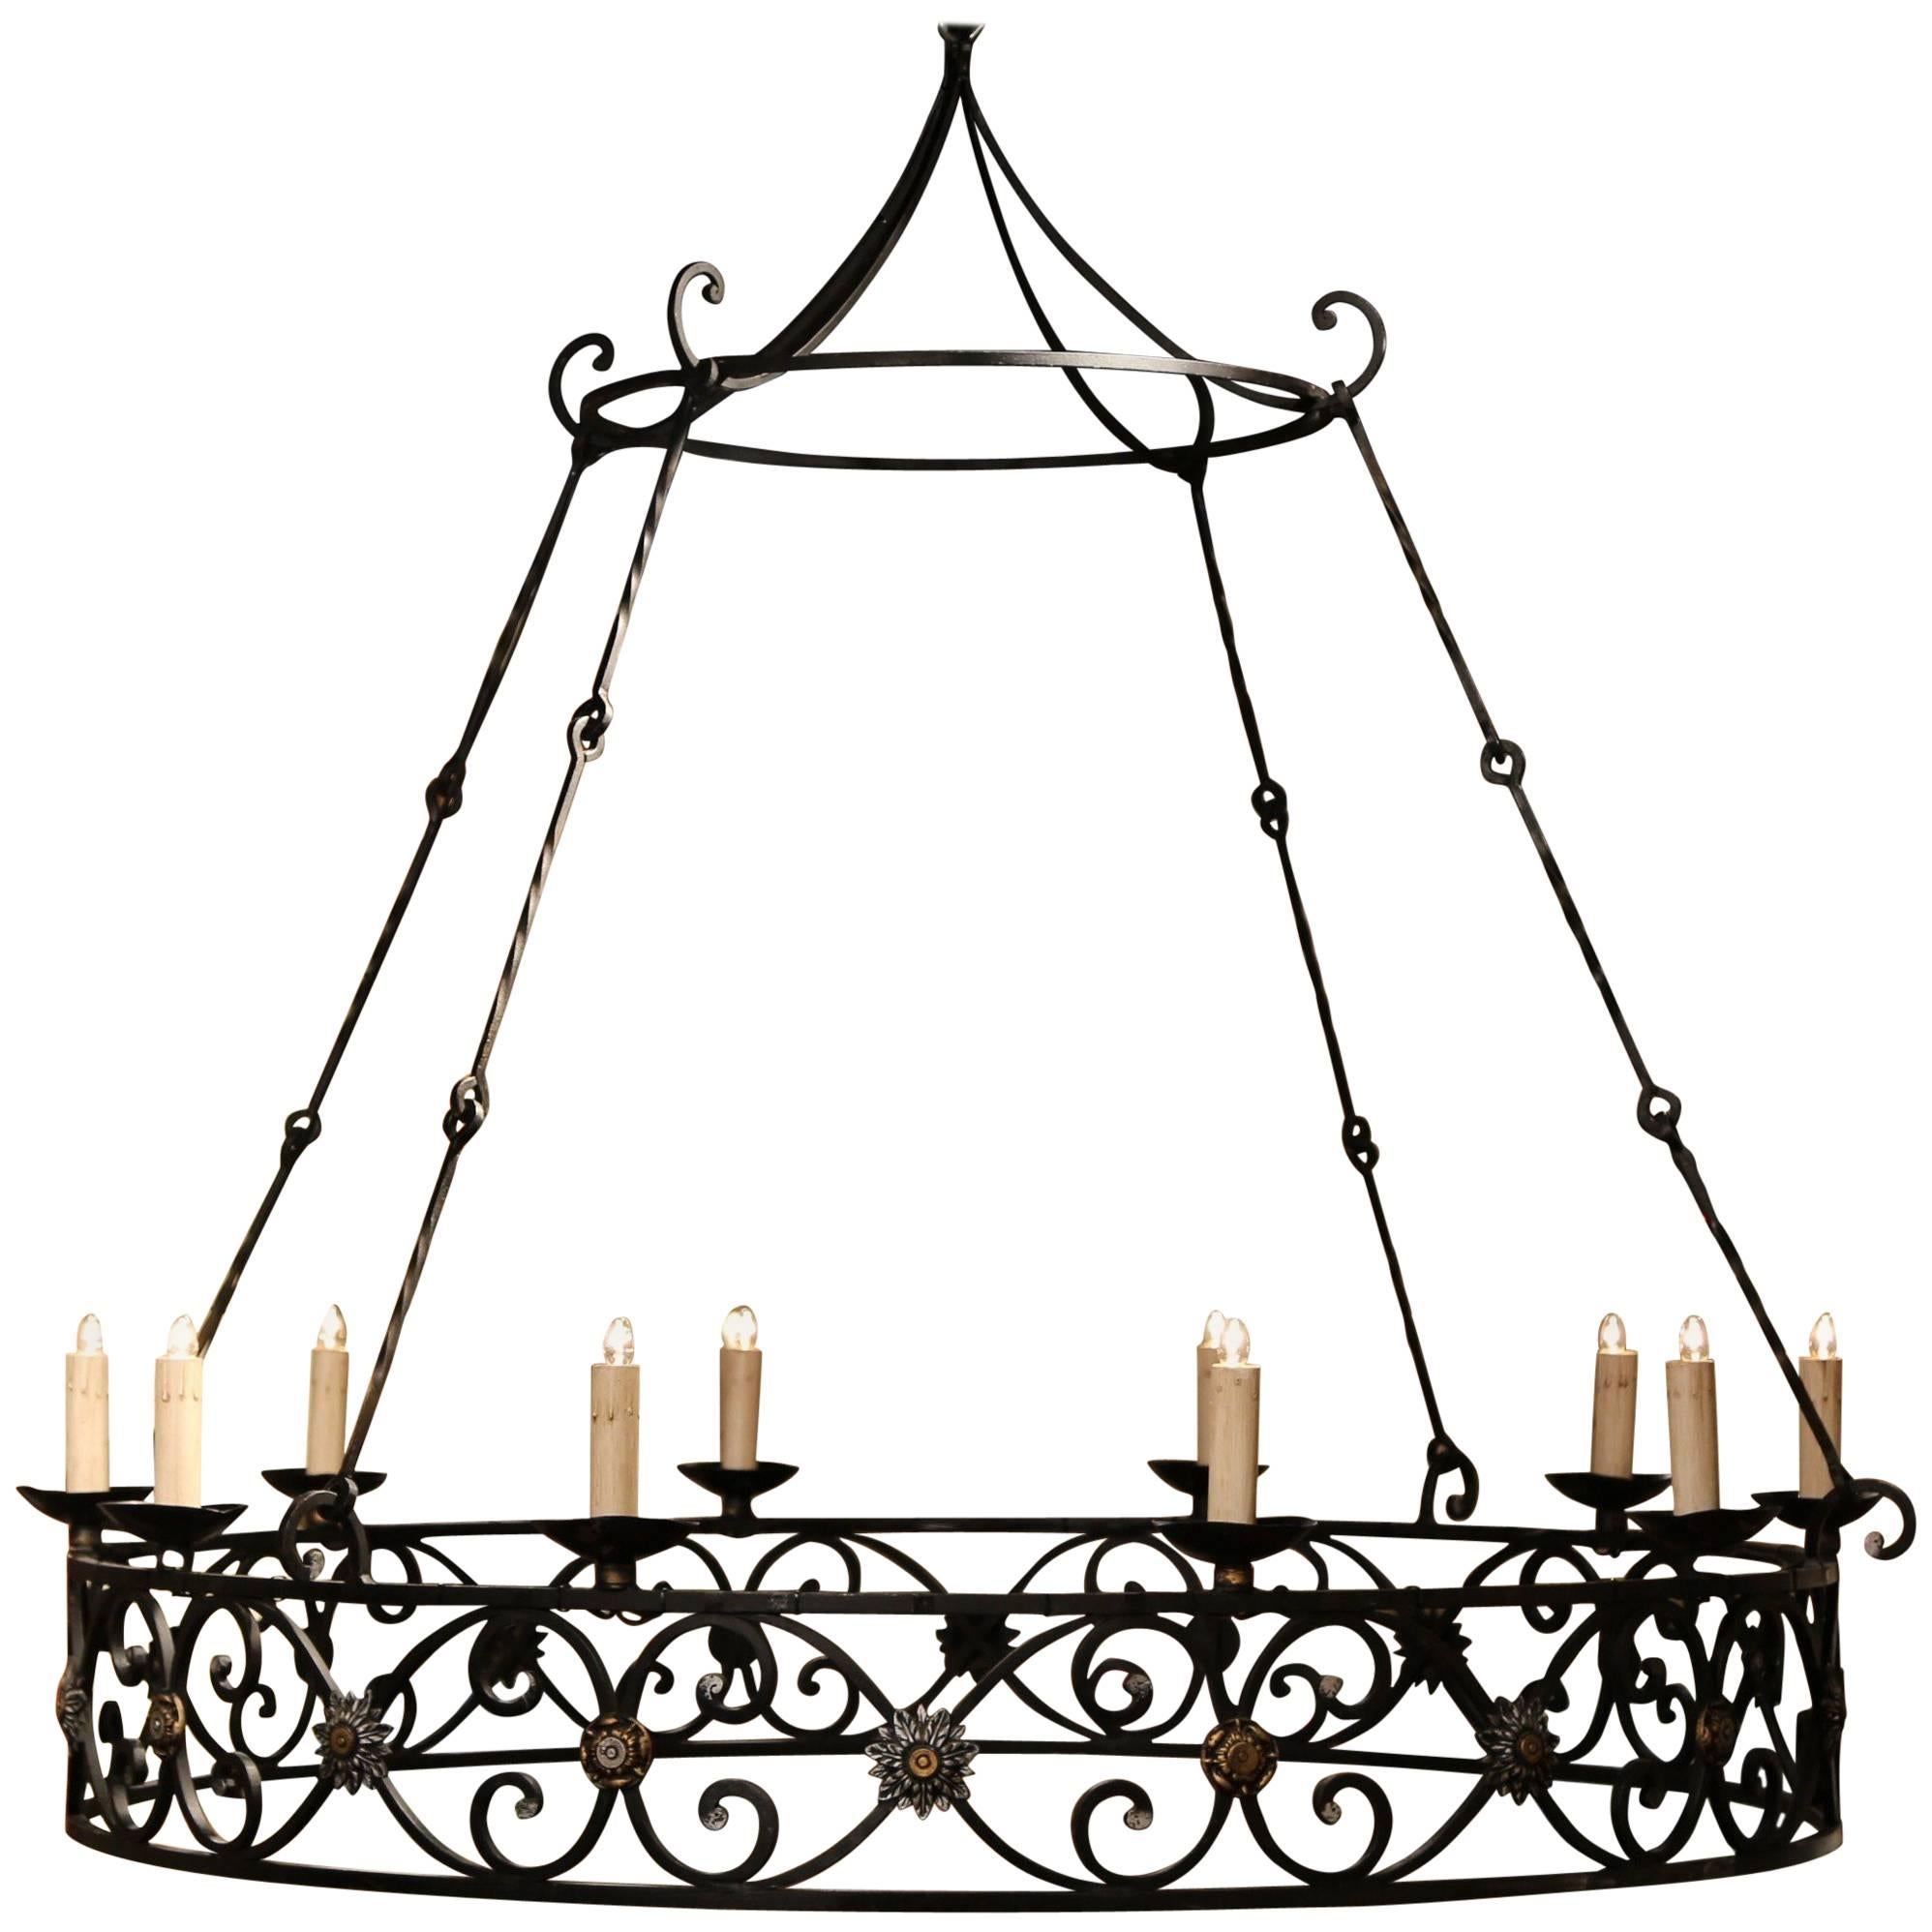  Large Early 20th Century French Iron Ten-Light Round Chandelier from Normandy